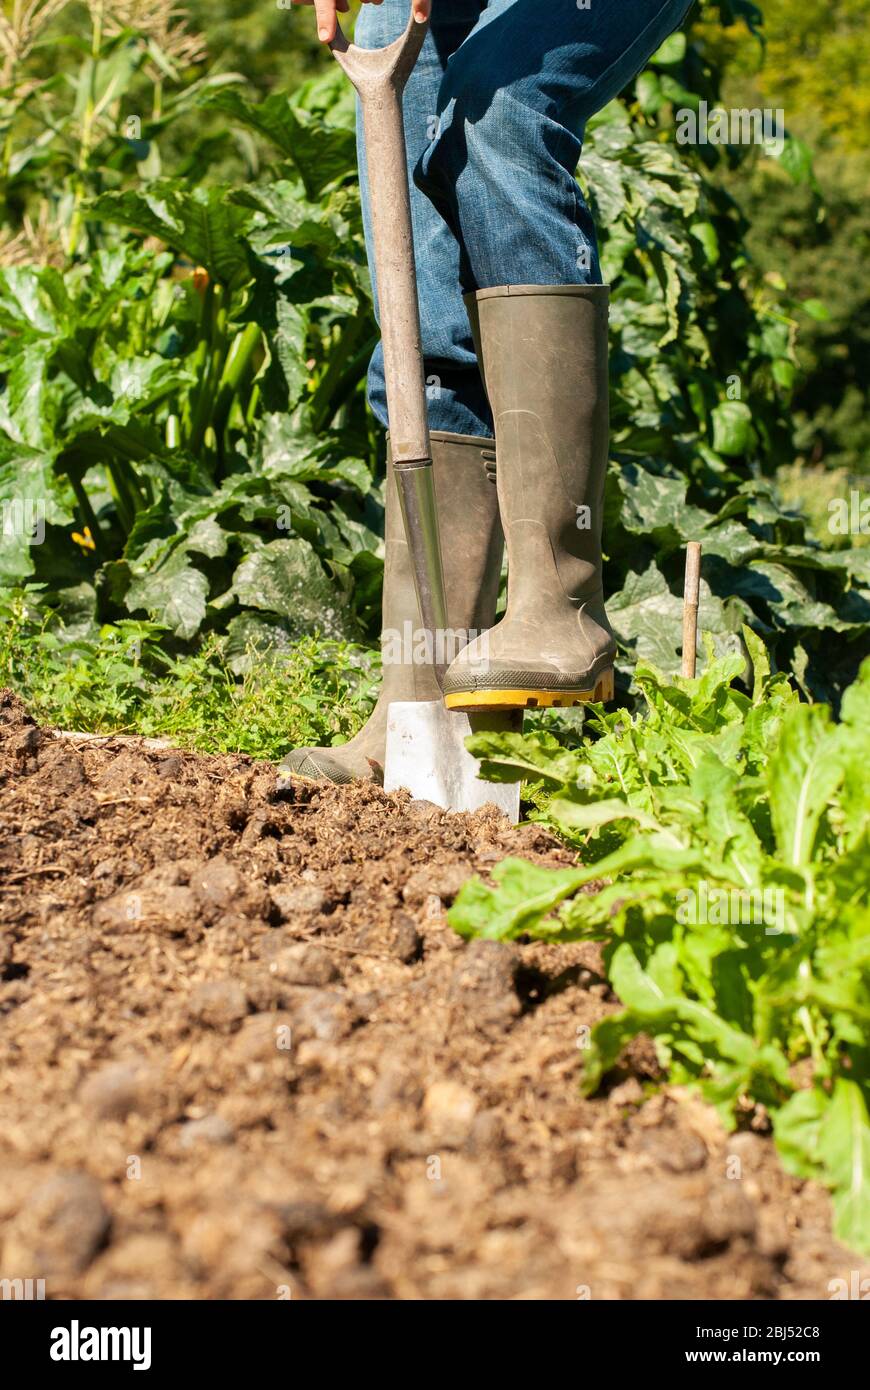 A man digging in a vegetable garden in spring time with some lettuces in the foreground. Portrait format. Stock Photo